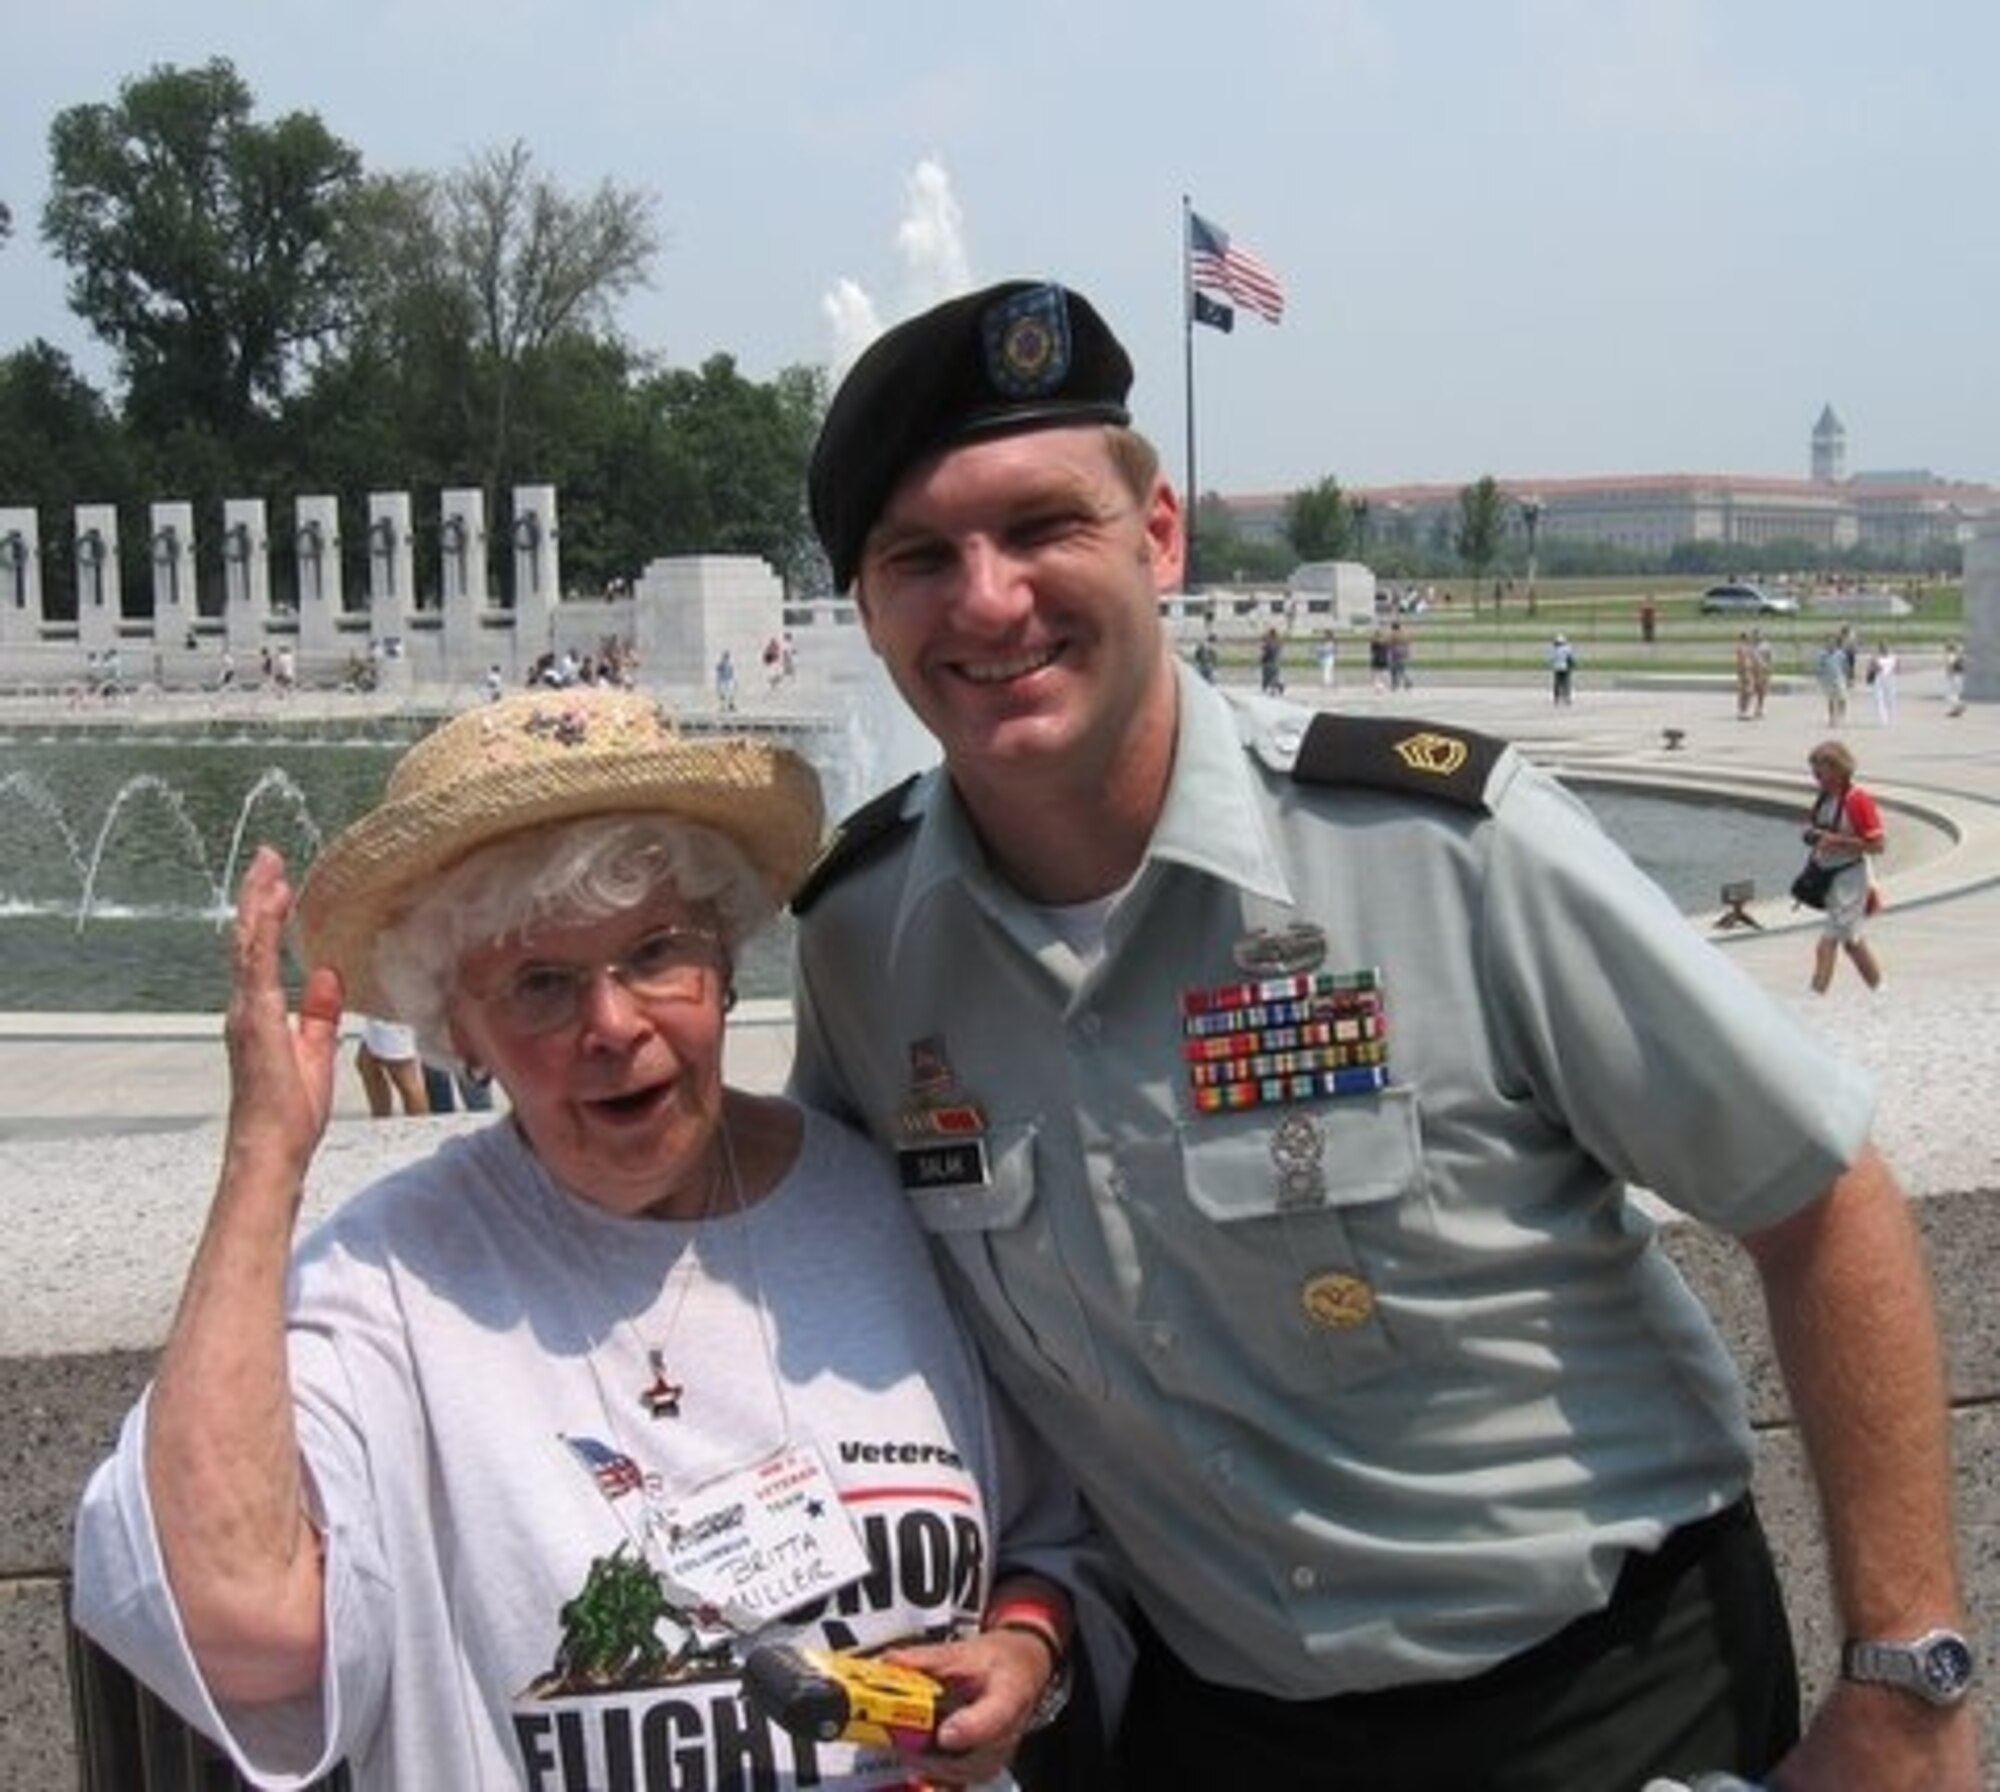 WASHINTONG D.C. -  Former Women’s Army Corps Private First Class Britta L. Miller, a WWII veteran, visits with Army Sergeant First Class Mark Salak at the WWII Memorial in Washington D.C. Sergeant Salak is currently assigned to the Pentagon and regularly meets with veterans coming to the nation’s capital with Honor Flight. (U.S. Air Force photo/Charlie Miller)